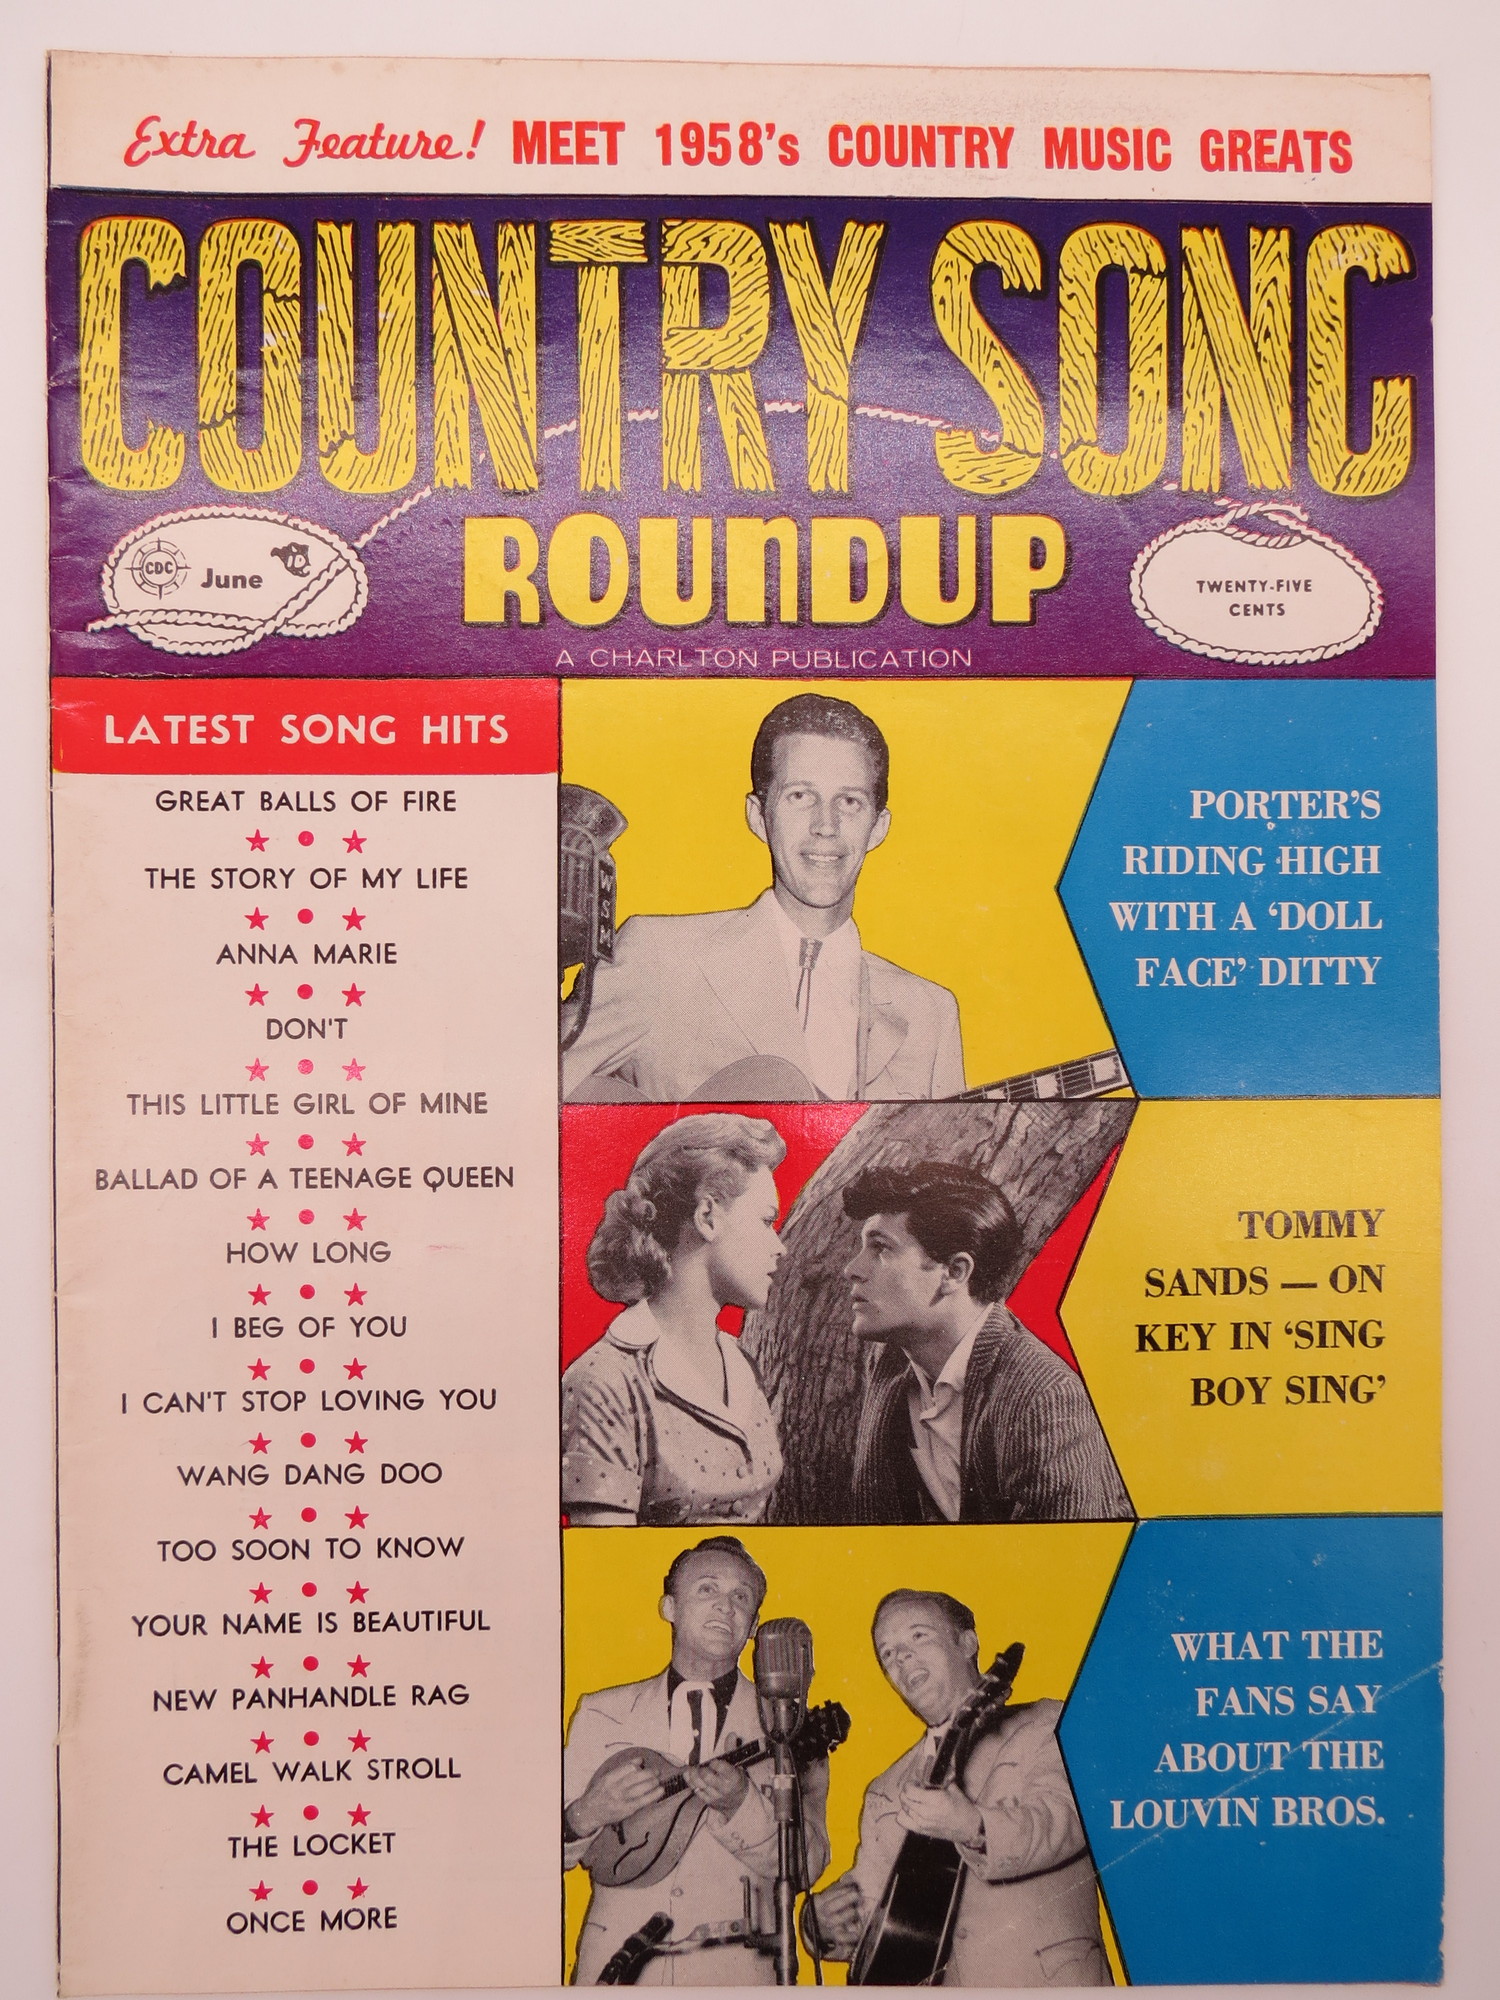 COUNTRY SONG ROUNDUP MAGAZINE, JUNE 1958 (ELVIS PRESLEY 'DIXIE DYNAMITE')